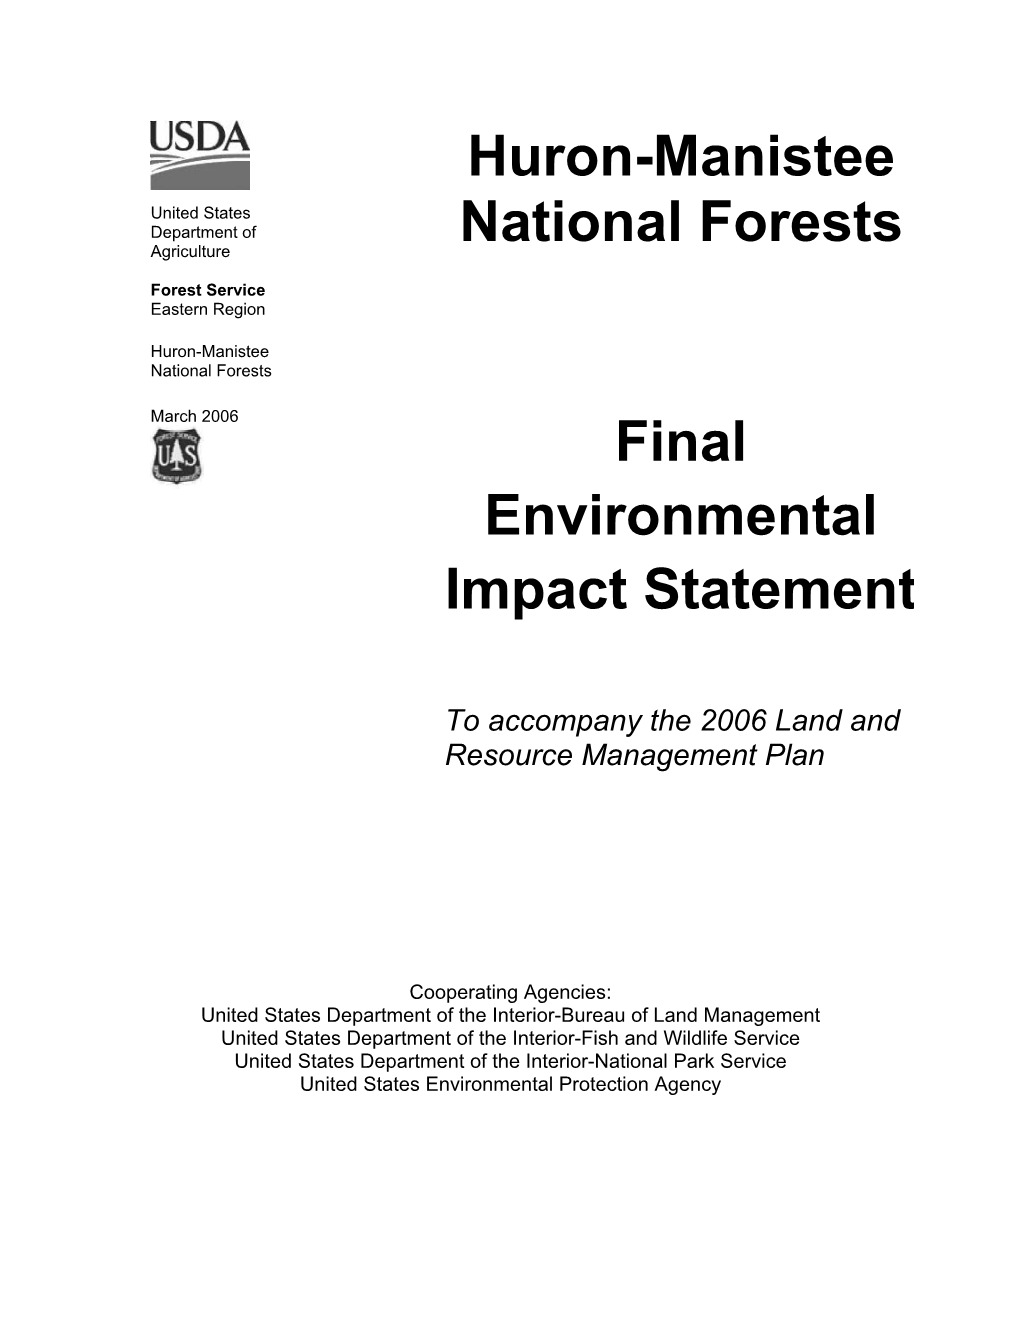 Huron-Manistee National Forests Final Environmental Impact Statement